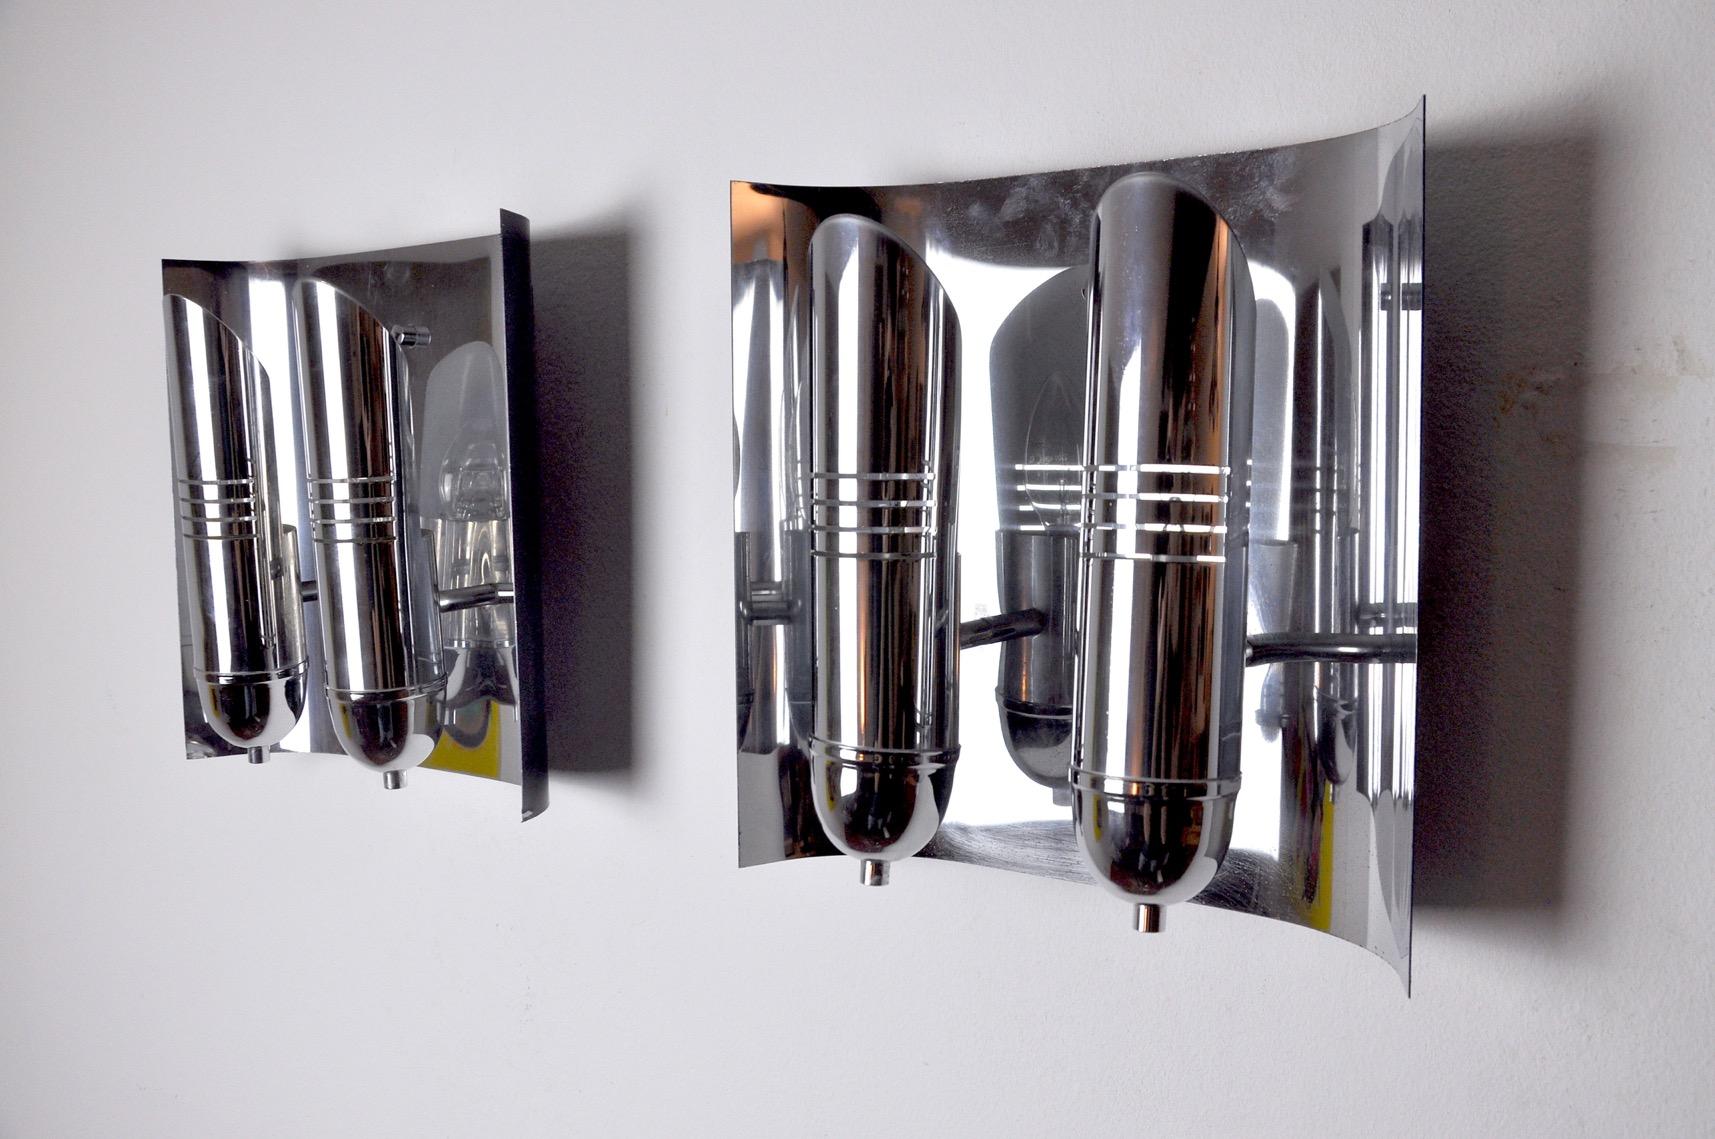 Pair of large tubular chrome wall lights designed and produced in Denmark in the 1970s. Unique object that will illuminate and bring a real designer touch to your interior. Electricity checked, mark of time relating to the age of the object. Easy